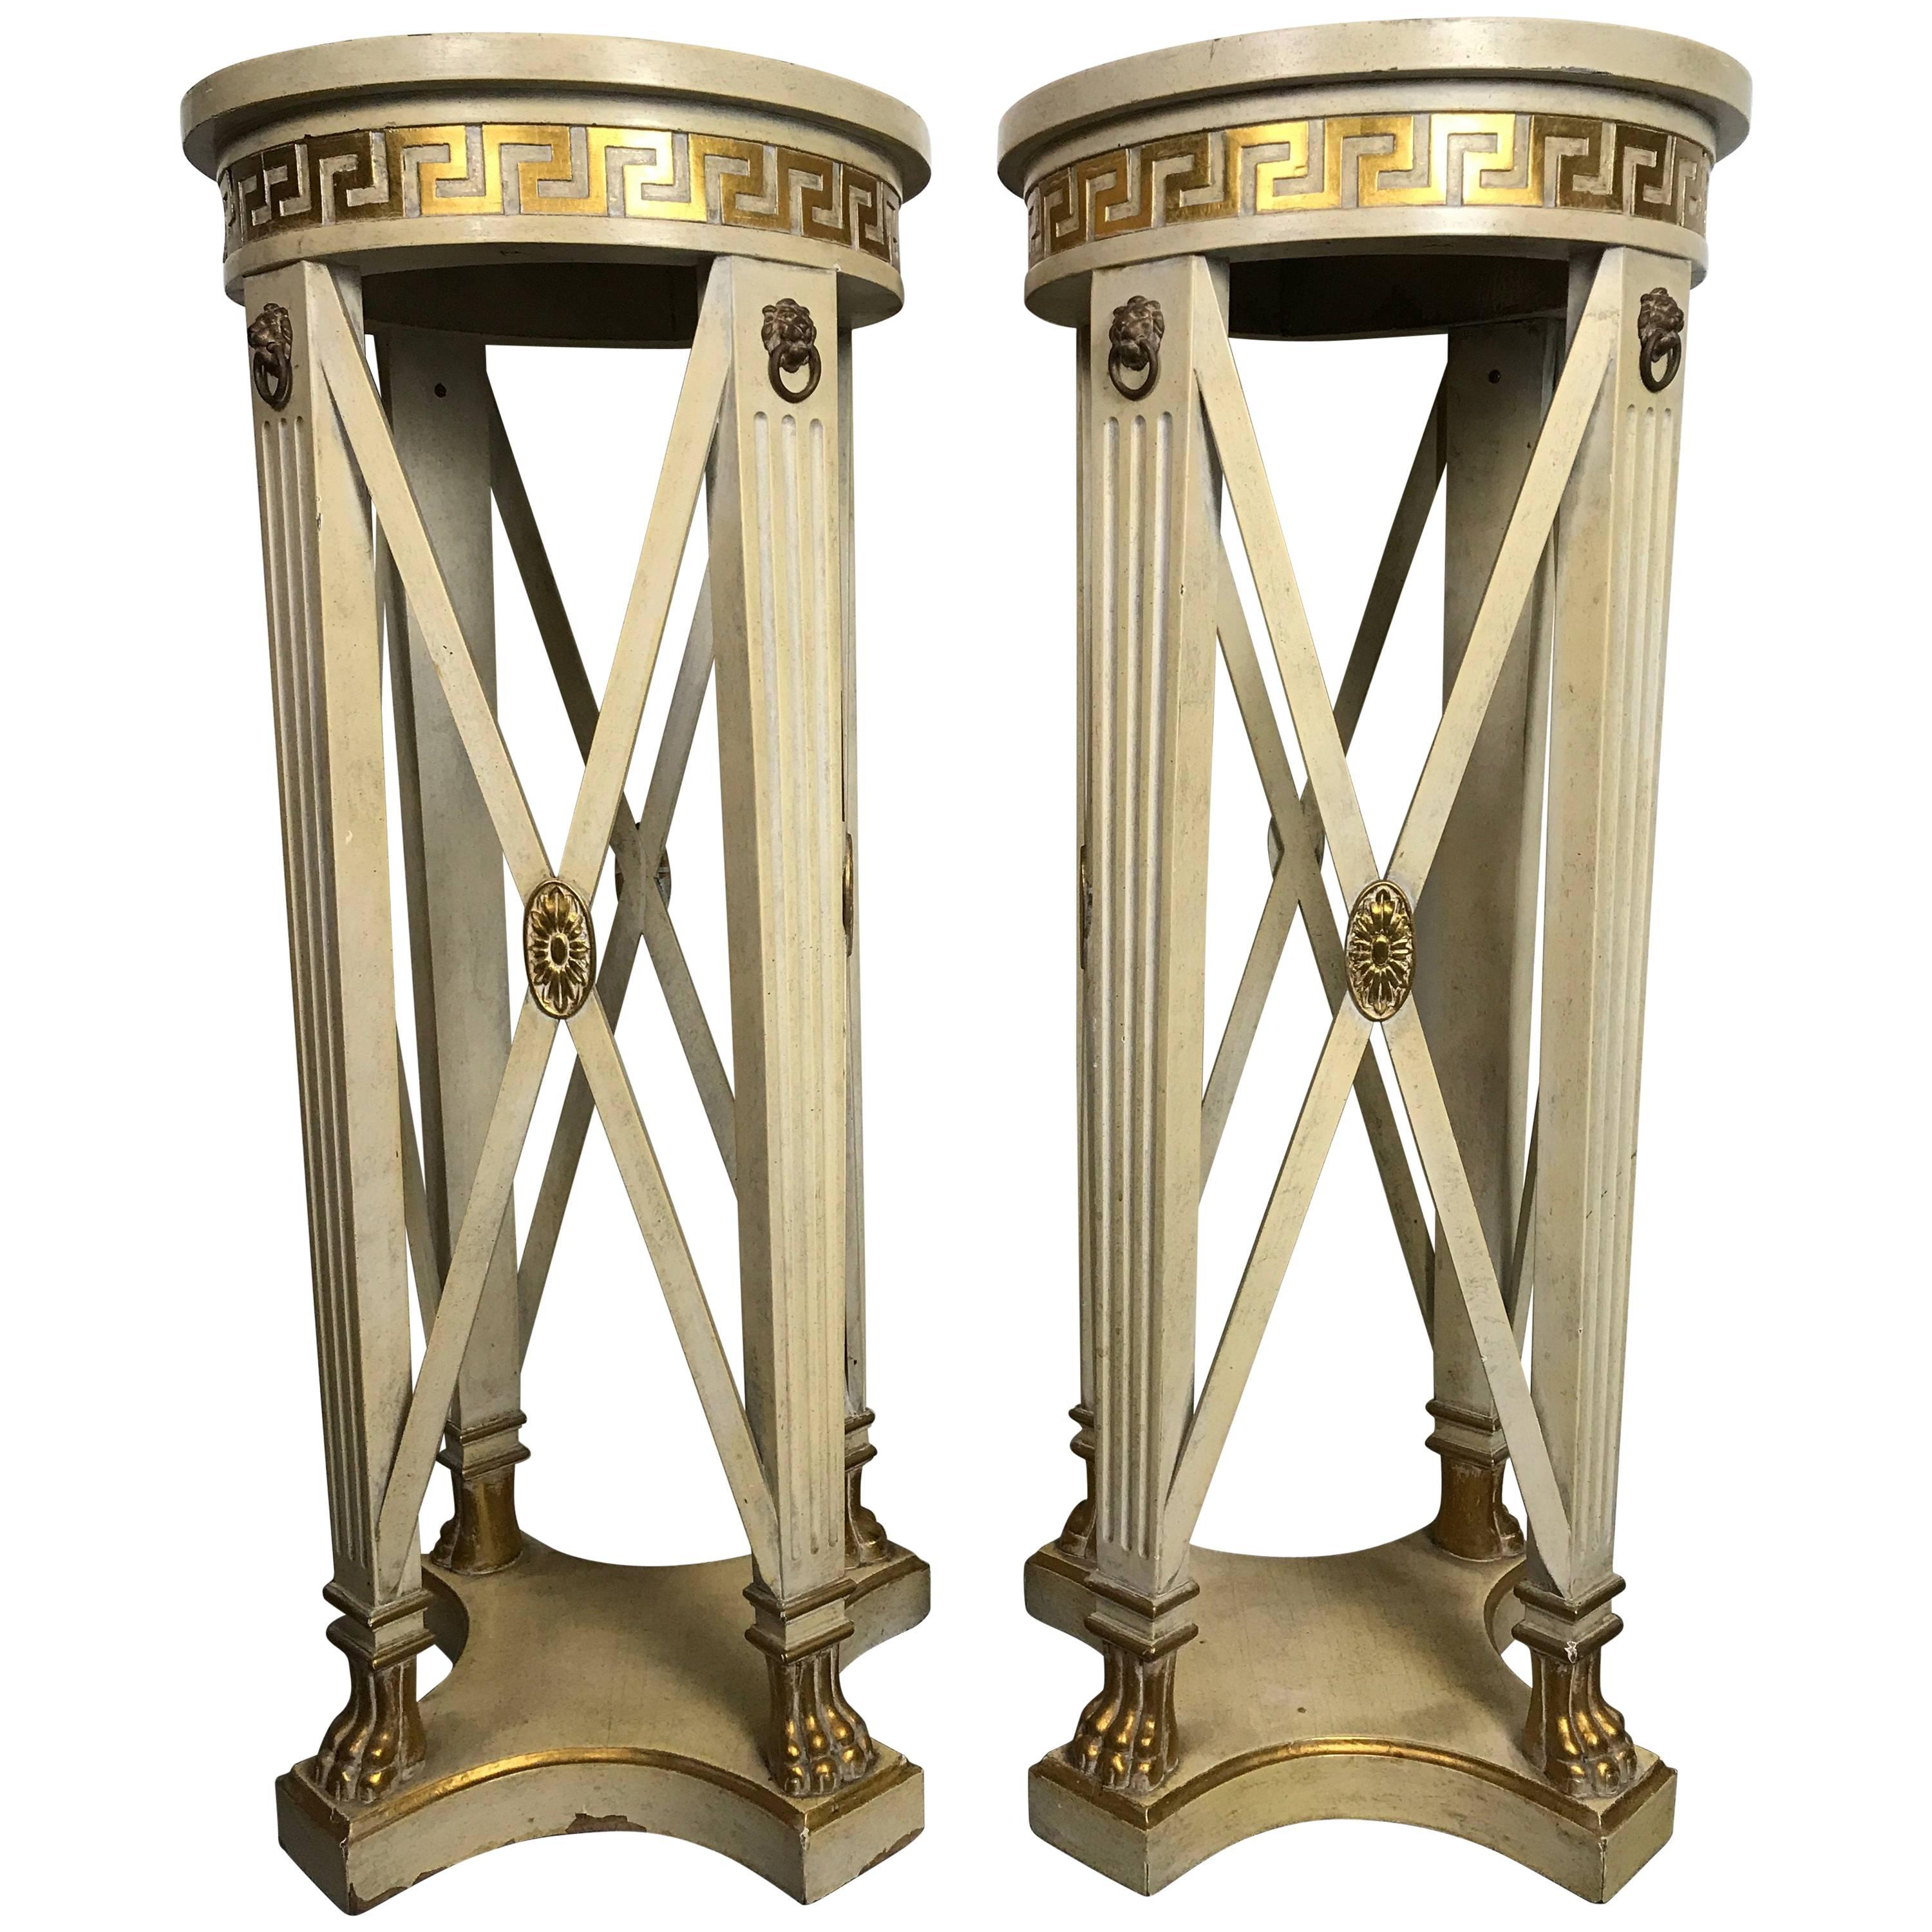 Pair of Regency Style Cream Painted Grosfeld House Pedestals For Sale